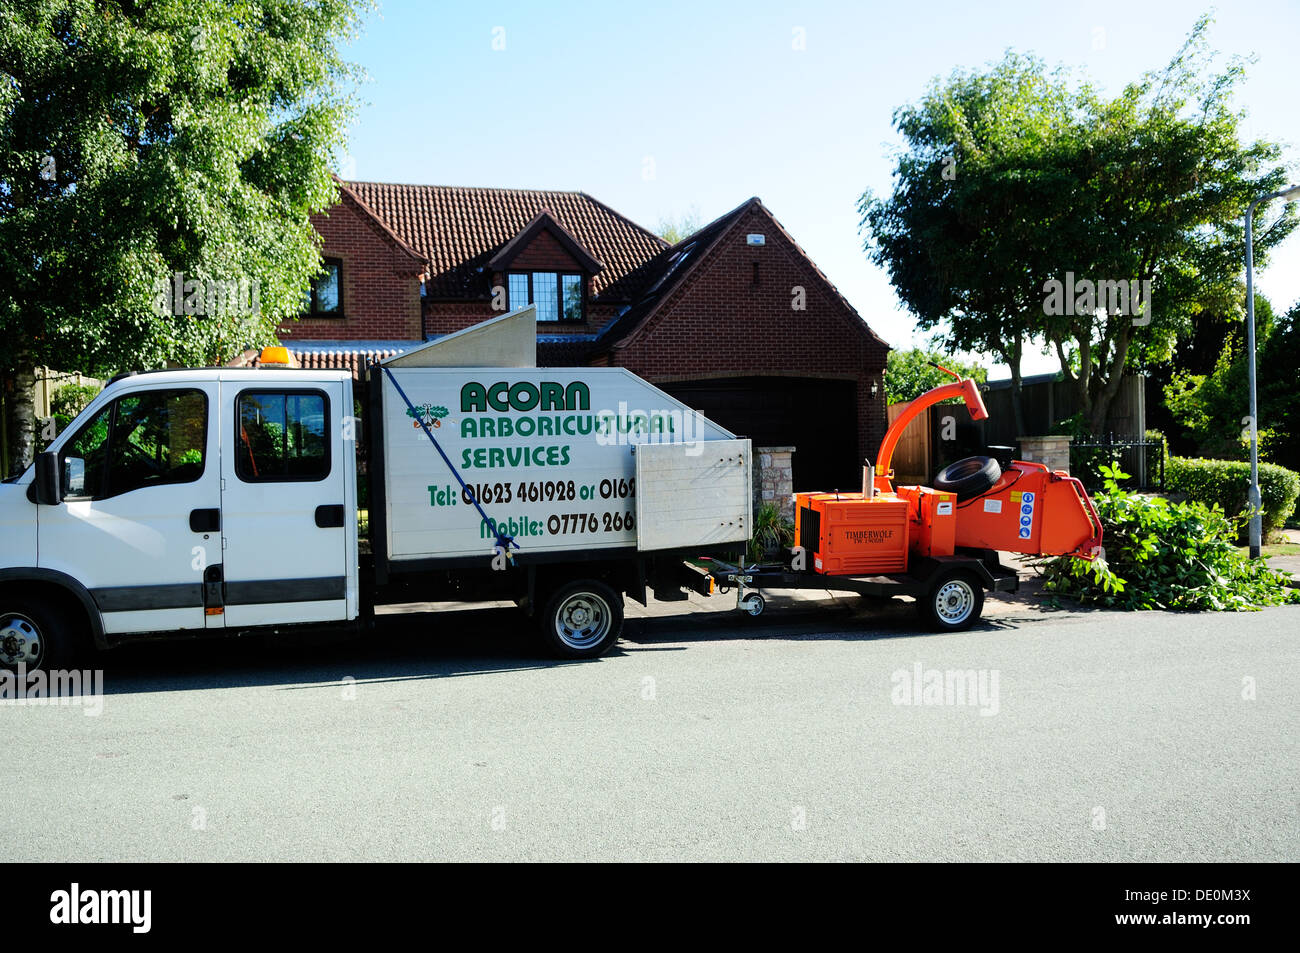 Aboricultral Tree Services. Stock Photo